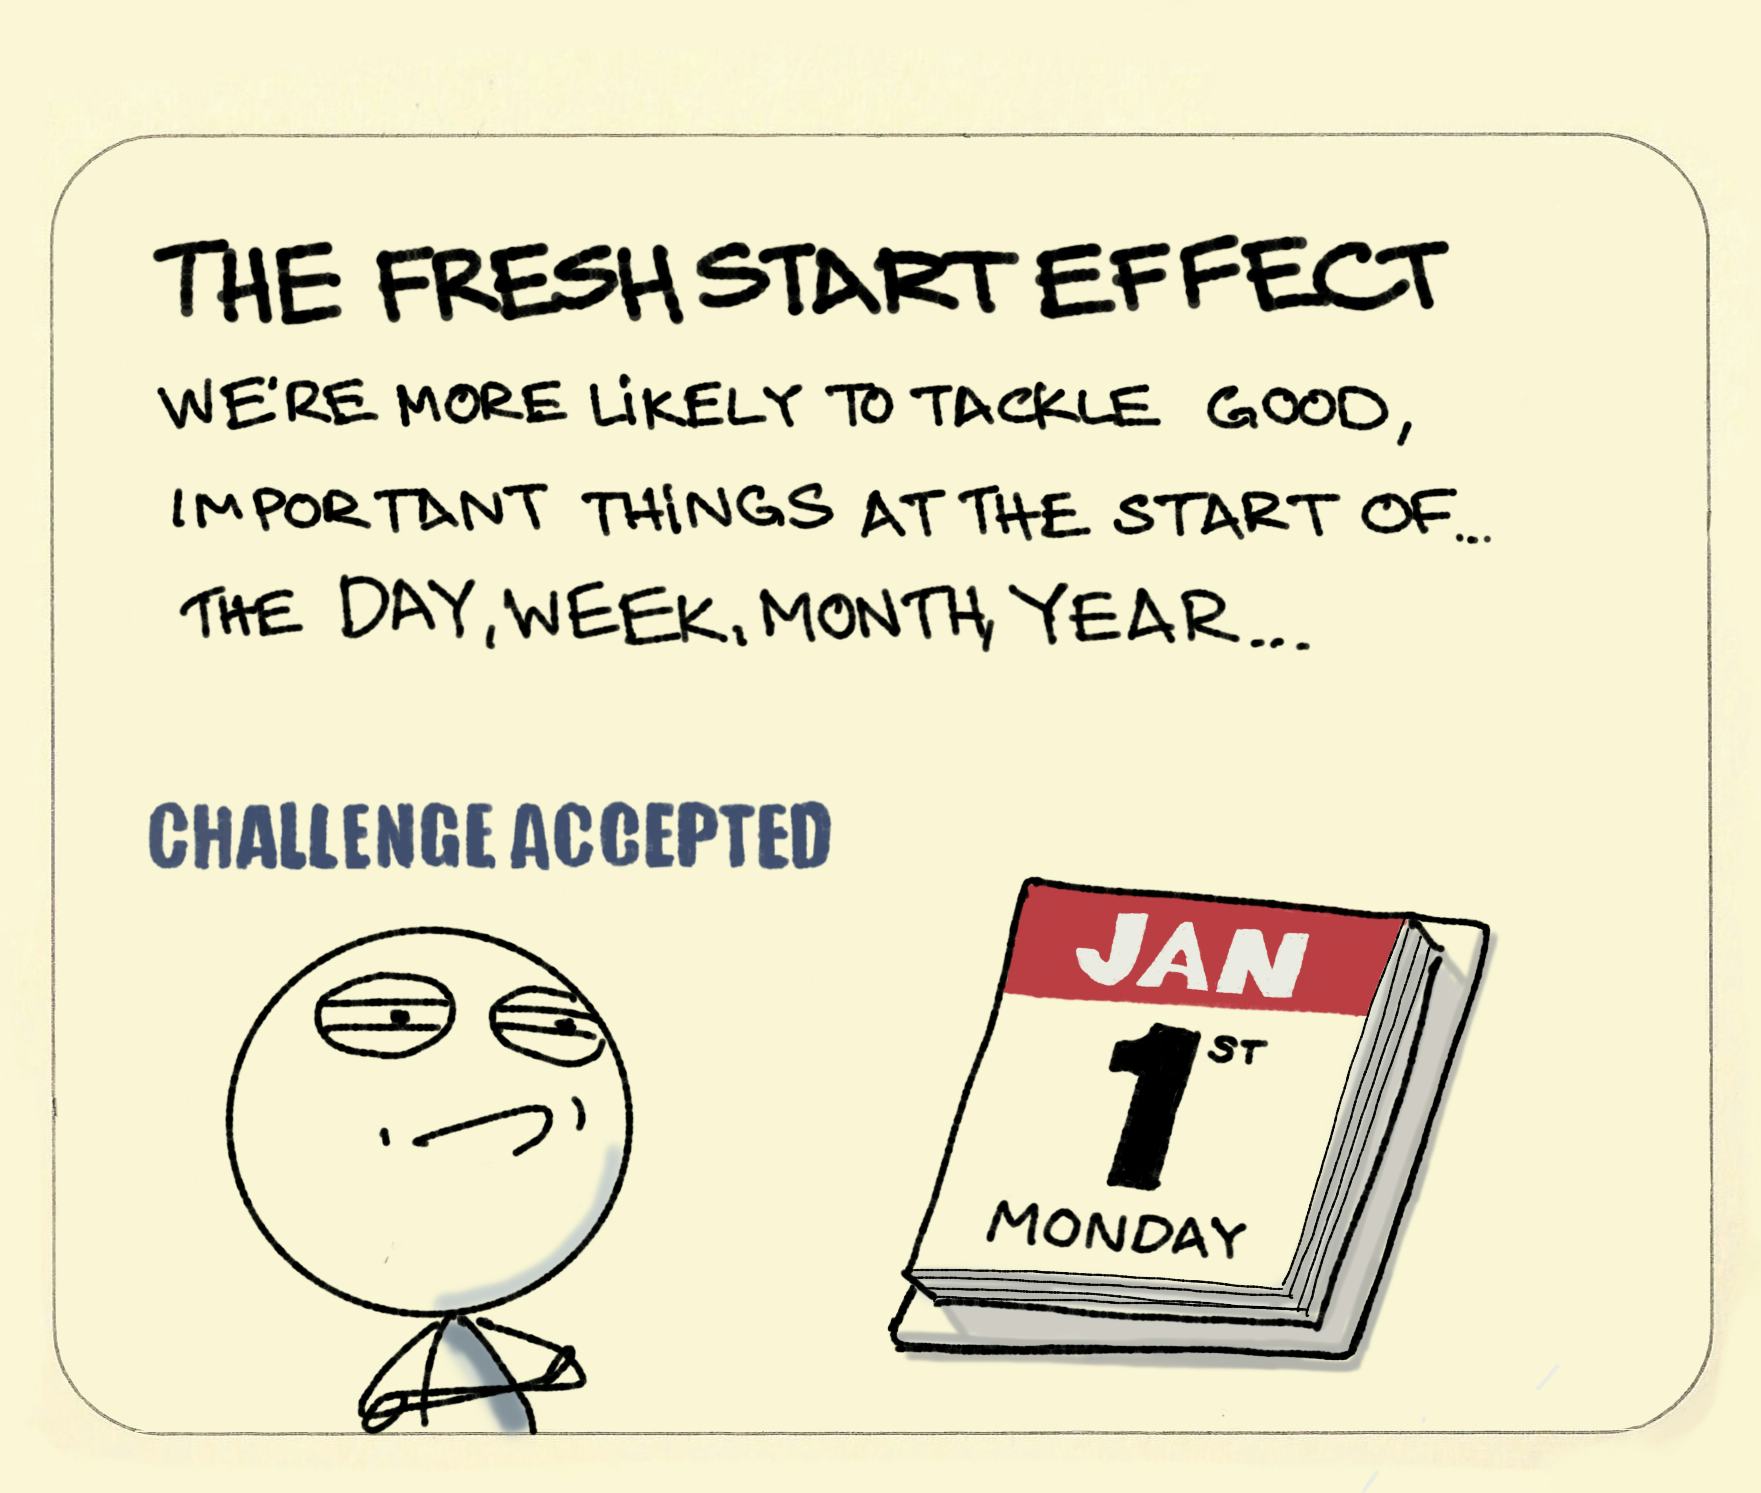 The fresh start effect - Sketchplanations